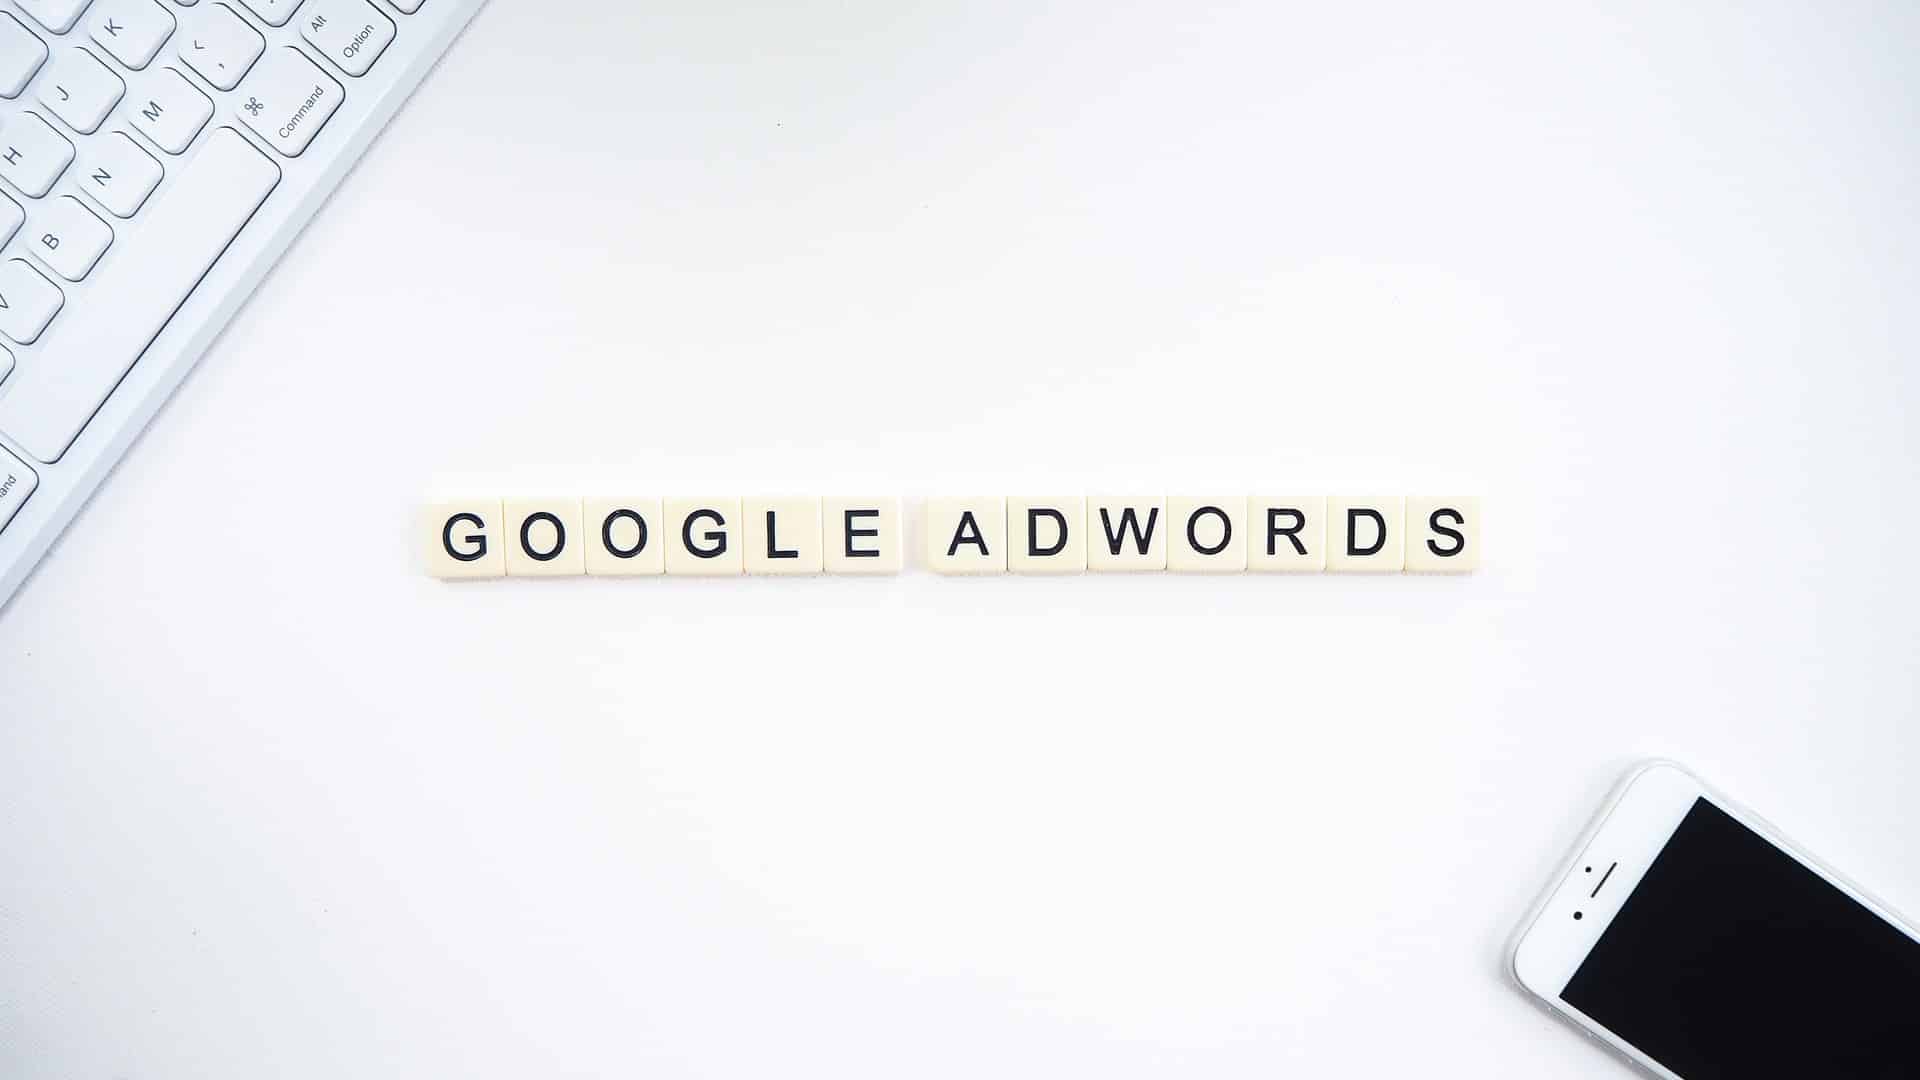 Google Adwords: What You Need To Know